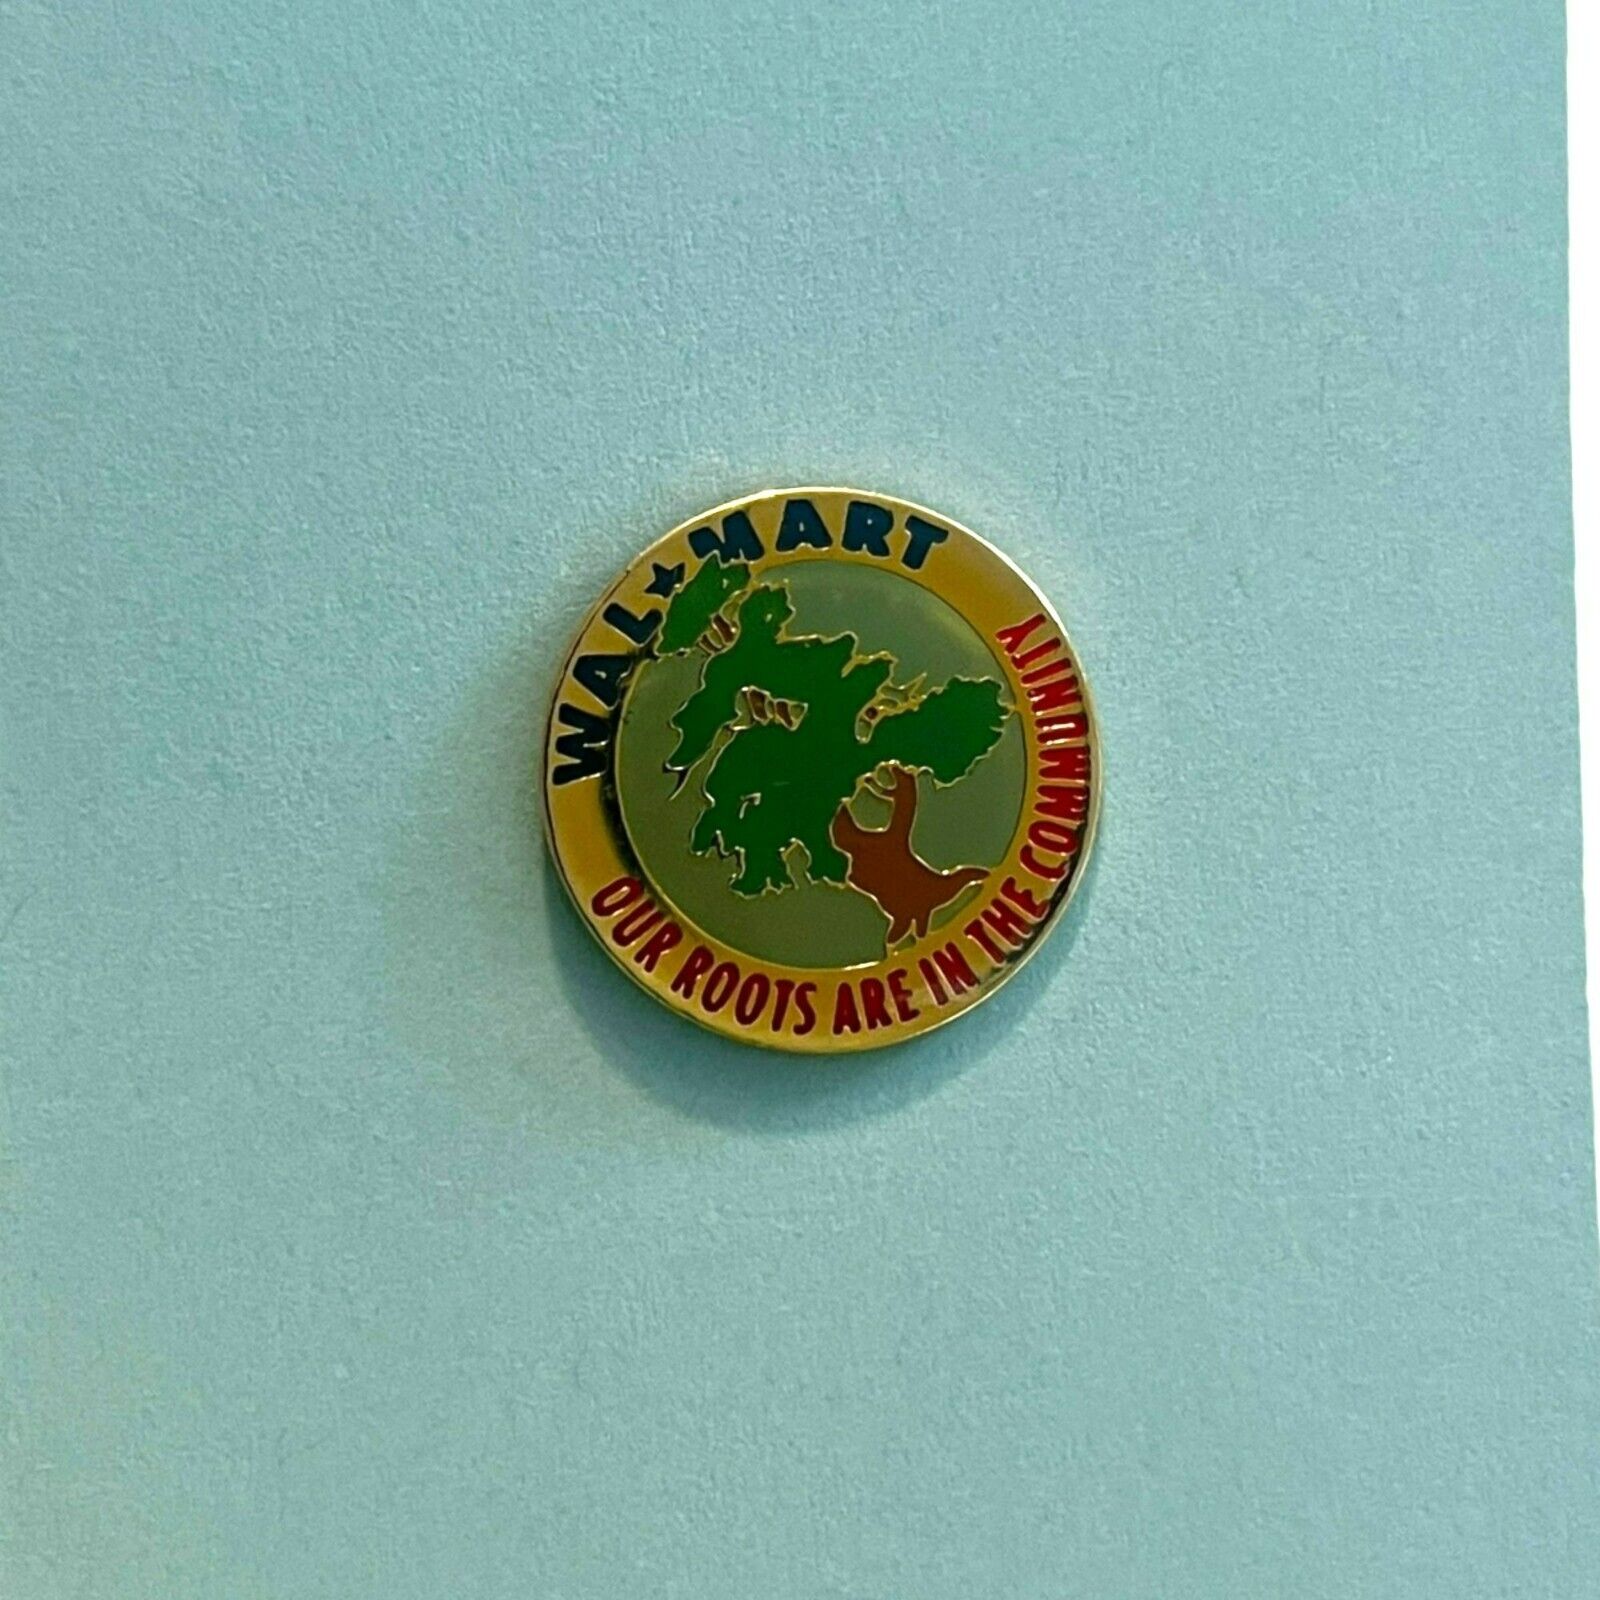 Walmart Employee Pin - Our Roots are in the Community Associate Collectible